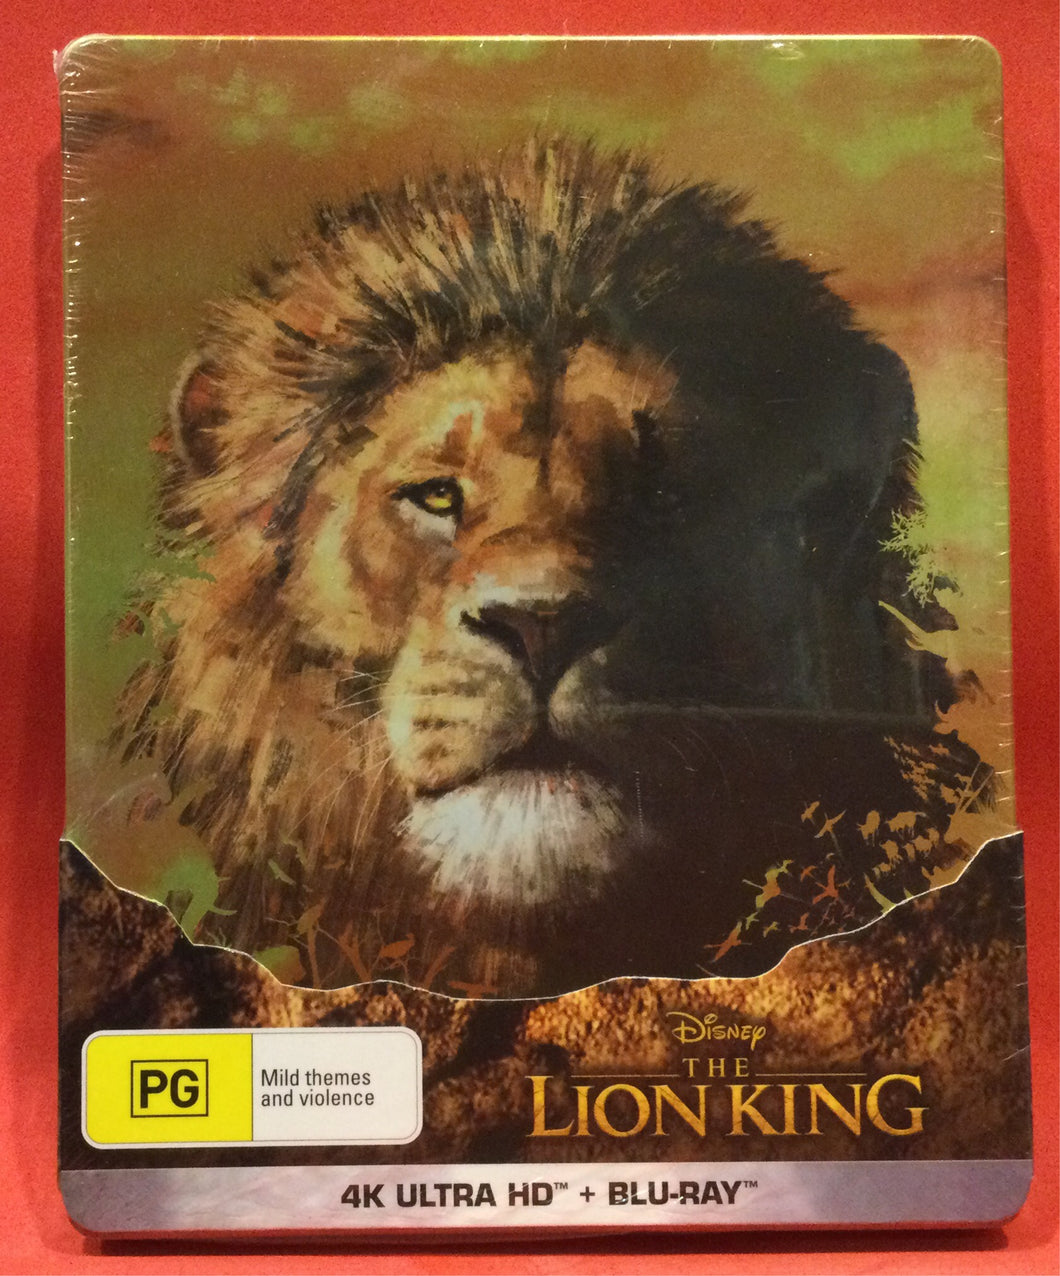 LION KING, THE - LIVE ACTION - 4K ULTRA HD + BLU-RAY DVD - STEELCASE (SEALED)